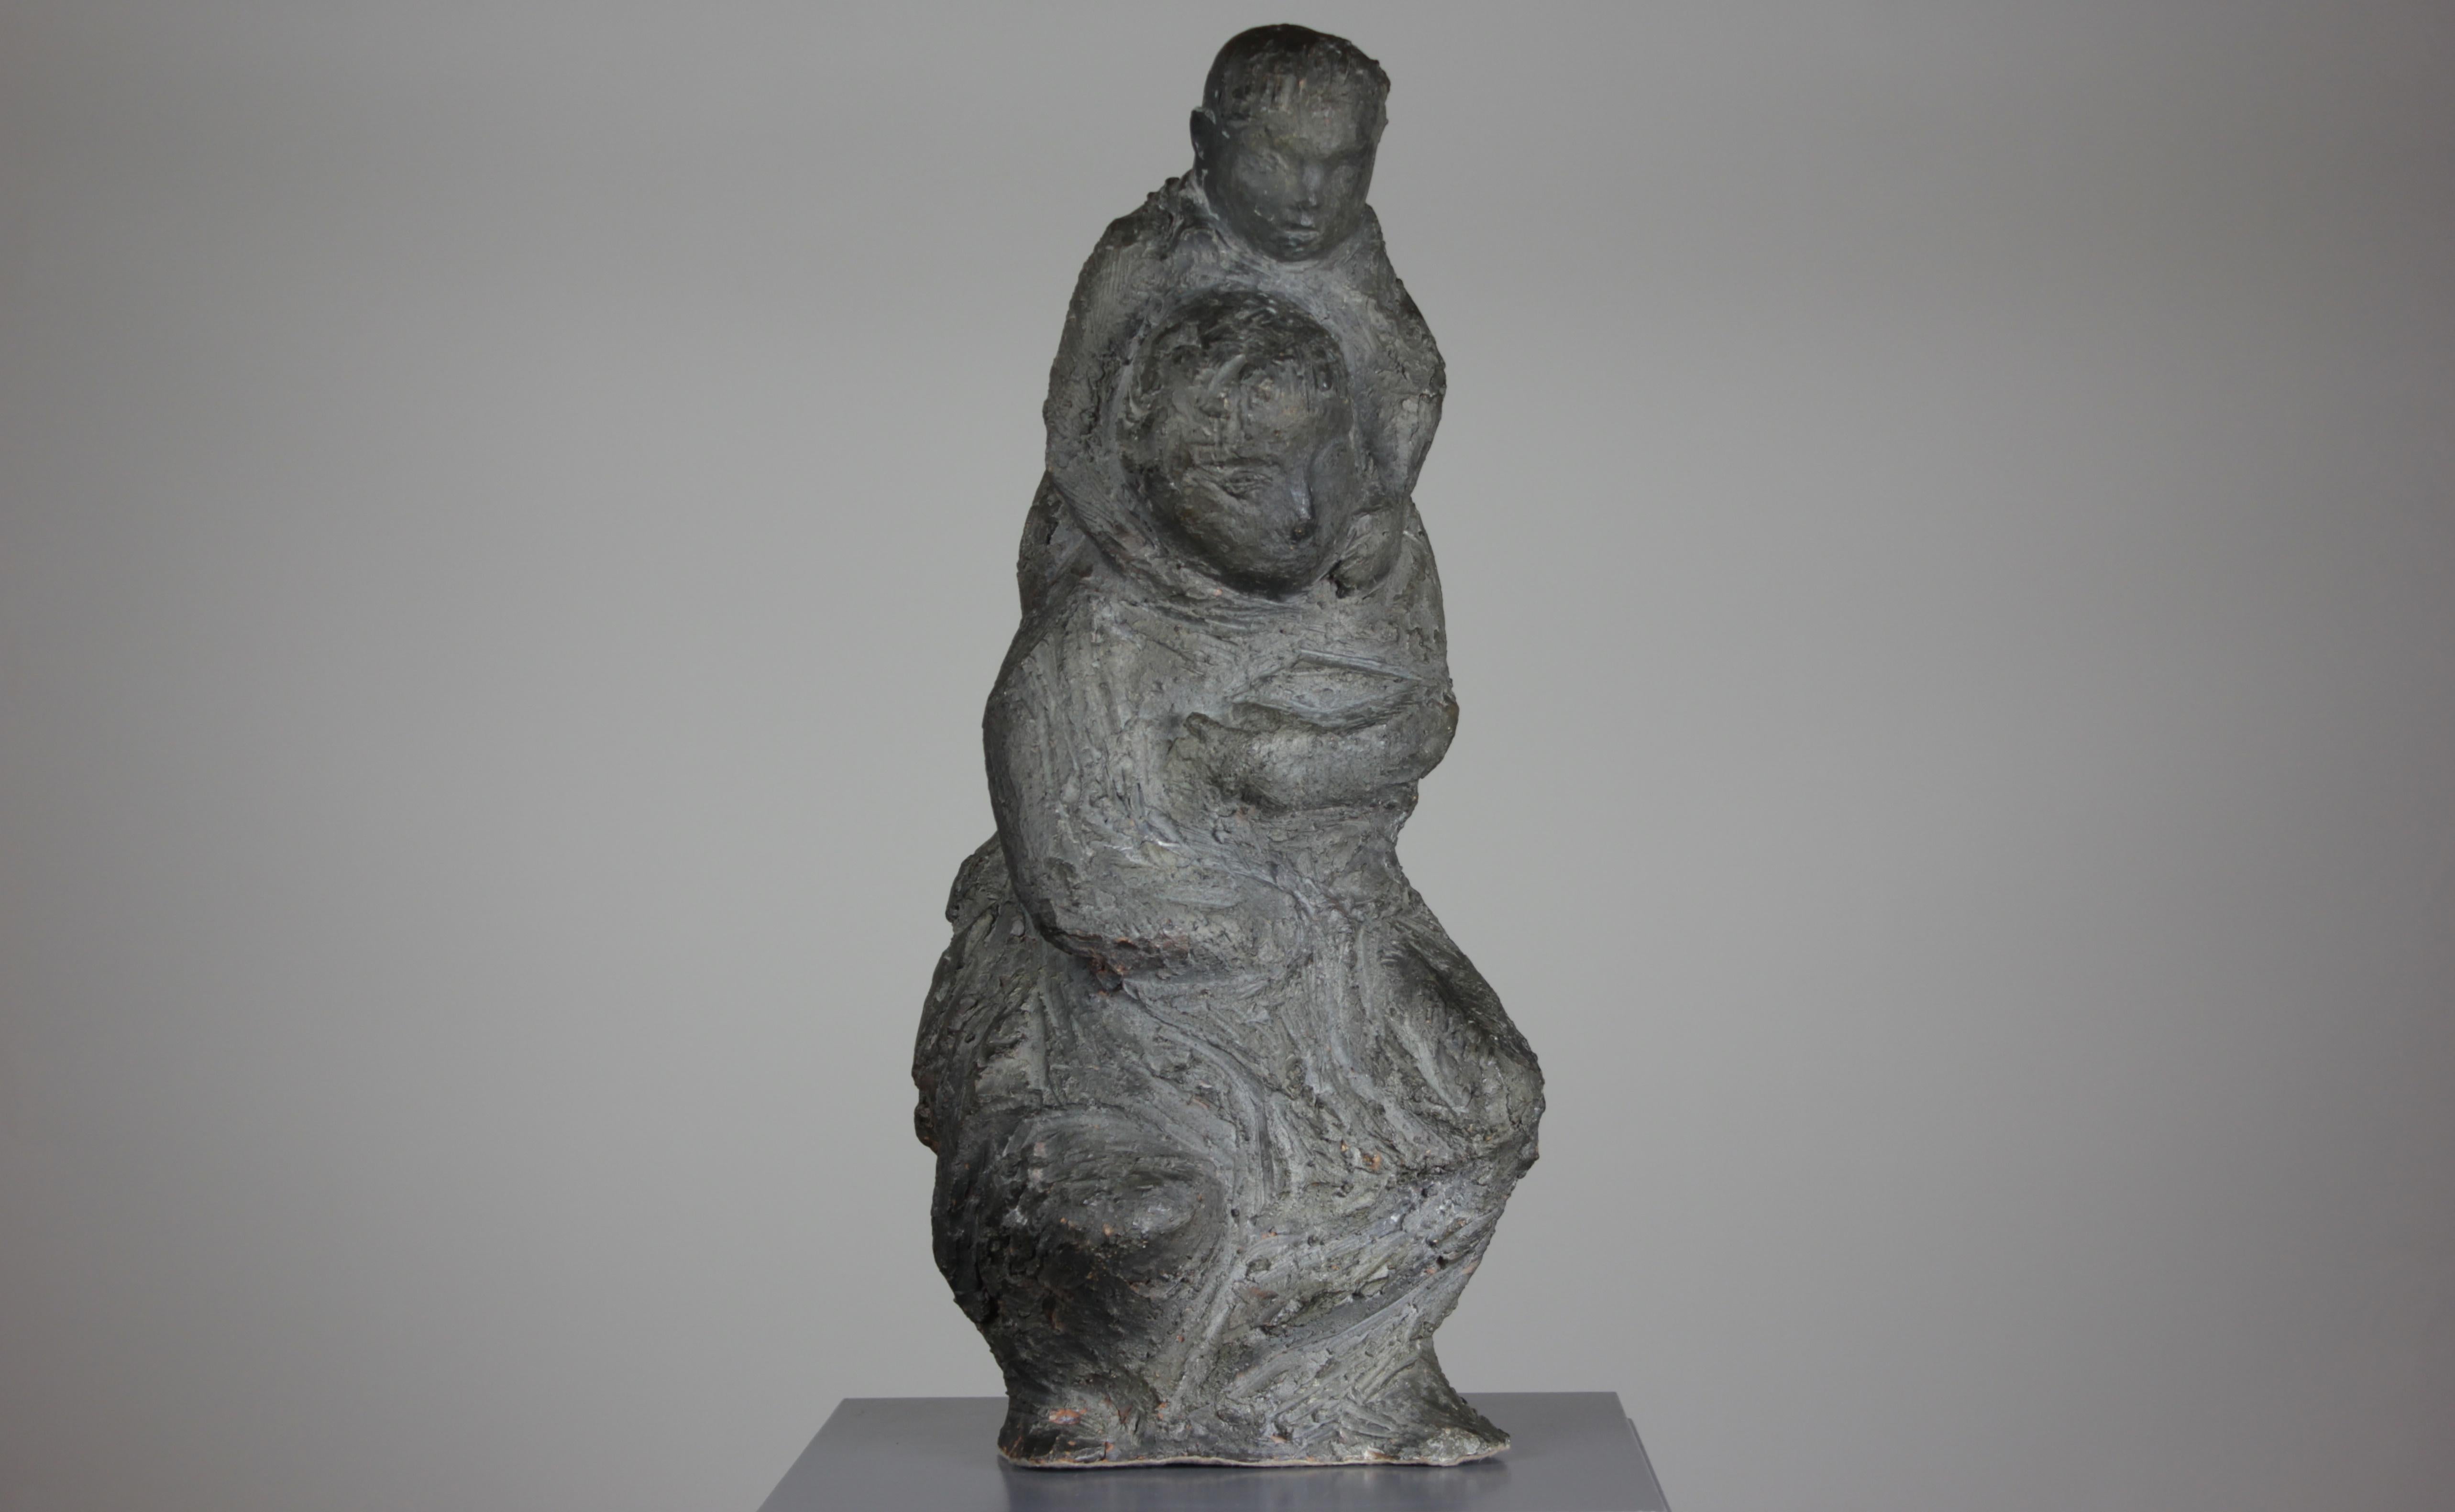 Mother and Child by Willy van der Putt (1925-1997)

circa 1965

Dutch

Stone

Signed

Born in Eindhoven, Willy van der Putt was a Dutch sculptor known for figurative sculptures that often depicted human and animal forms. Van der Putt